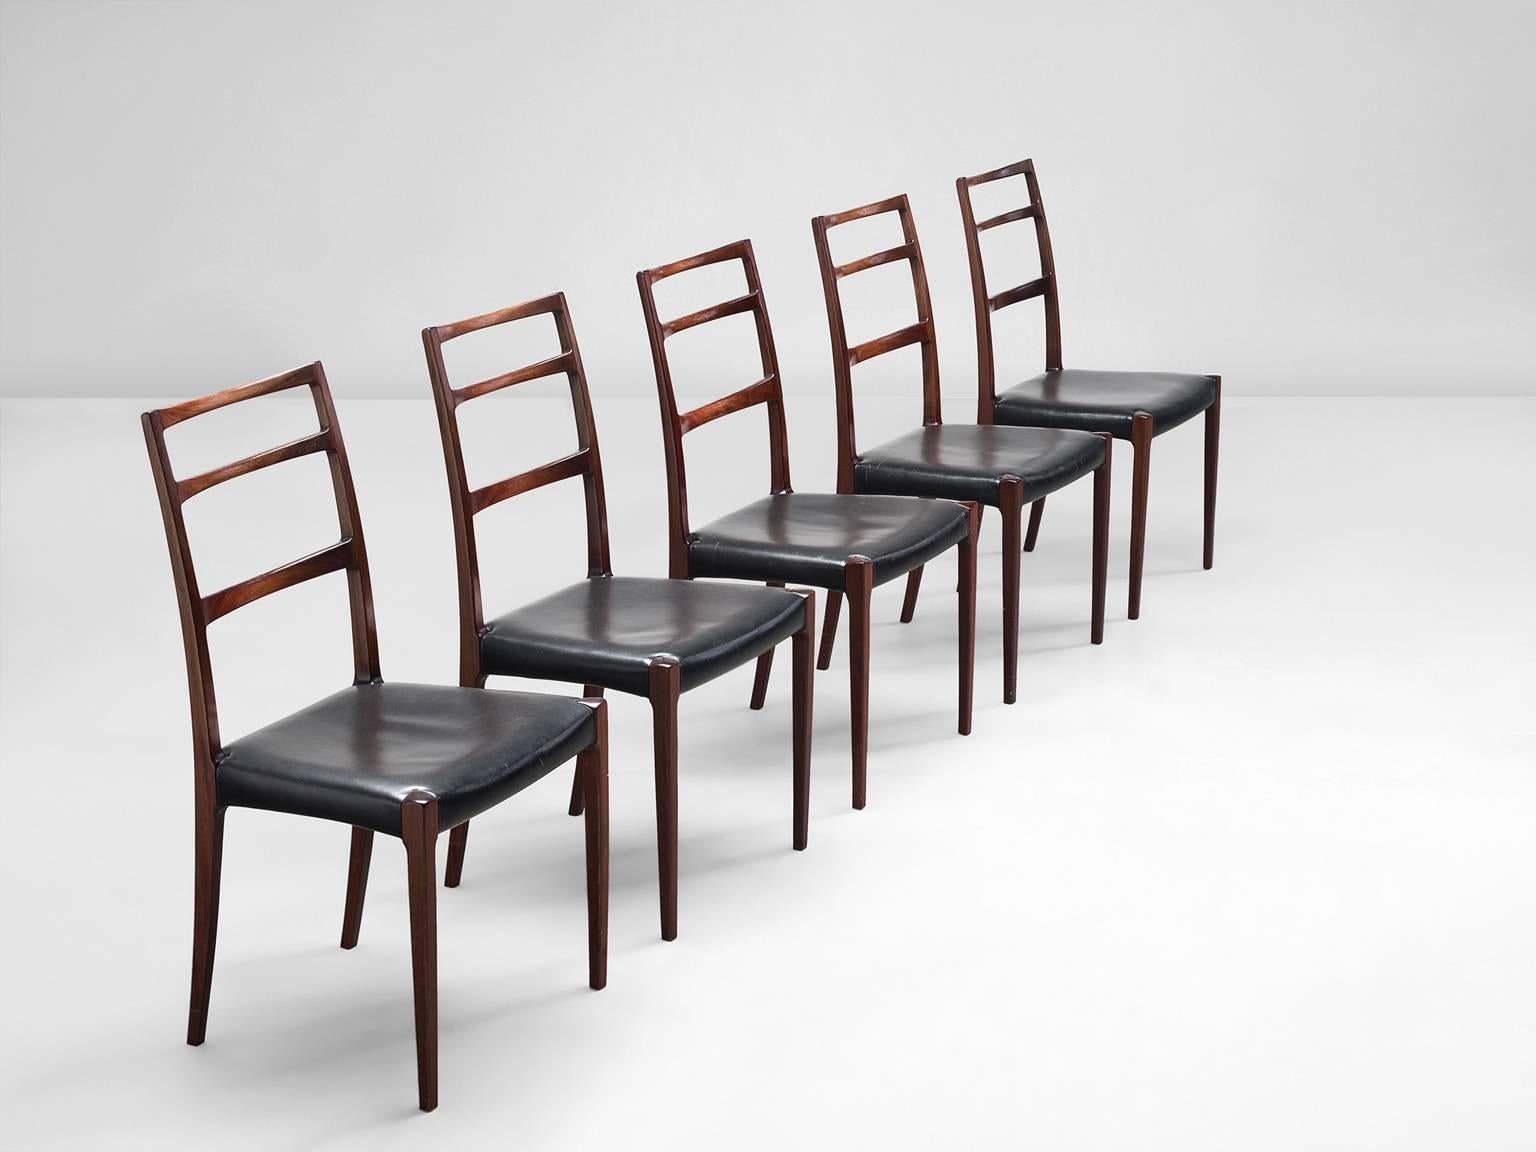 Gunni Omann for Omann Jun, dining chairs, leather, mahogany, Denmark, 1960s-1970s.

This set of five elegant dining chairs features a delicate, well-executed frame. The back is slightly curved and tilted and the open back is supported by three